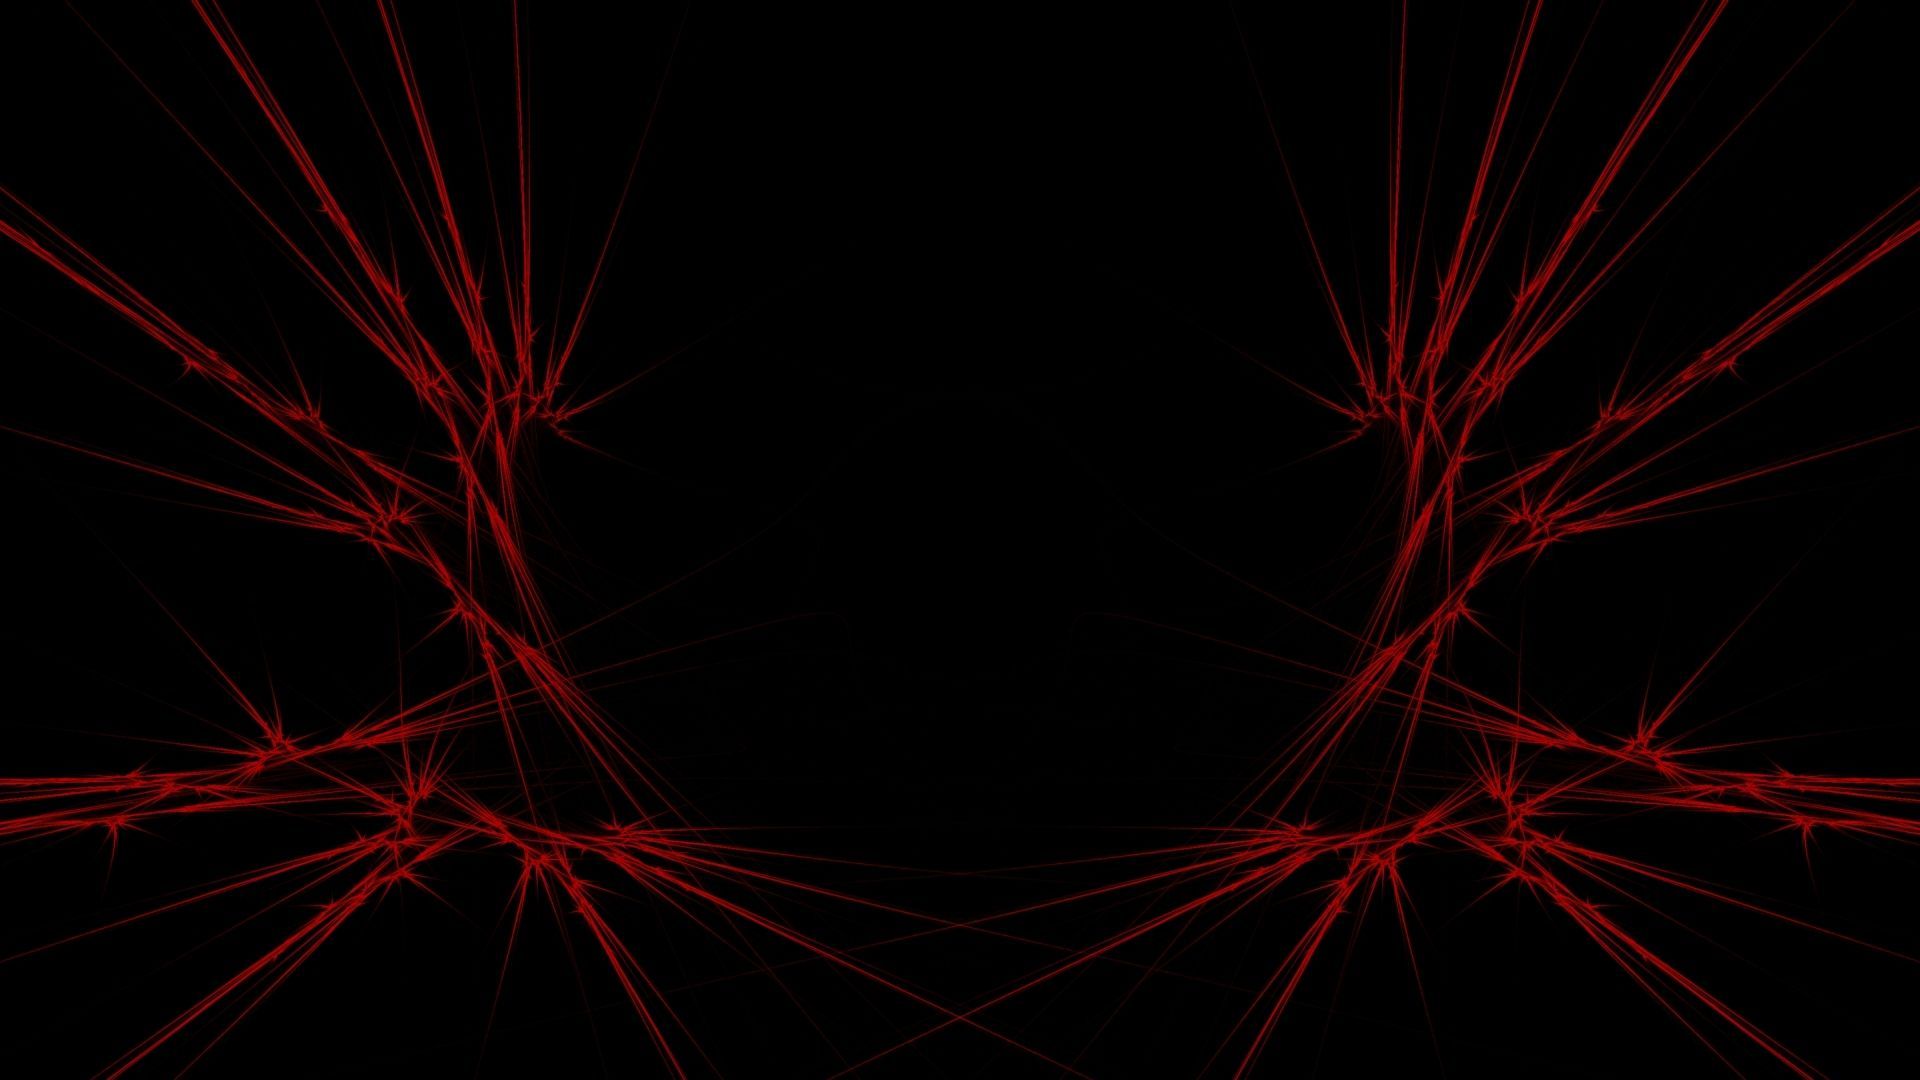 Download Wallpaper 1920x1080 Red, Black, Abstract Full HD 1080p HD ...